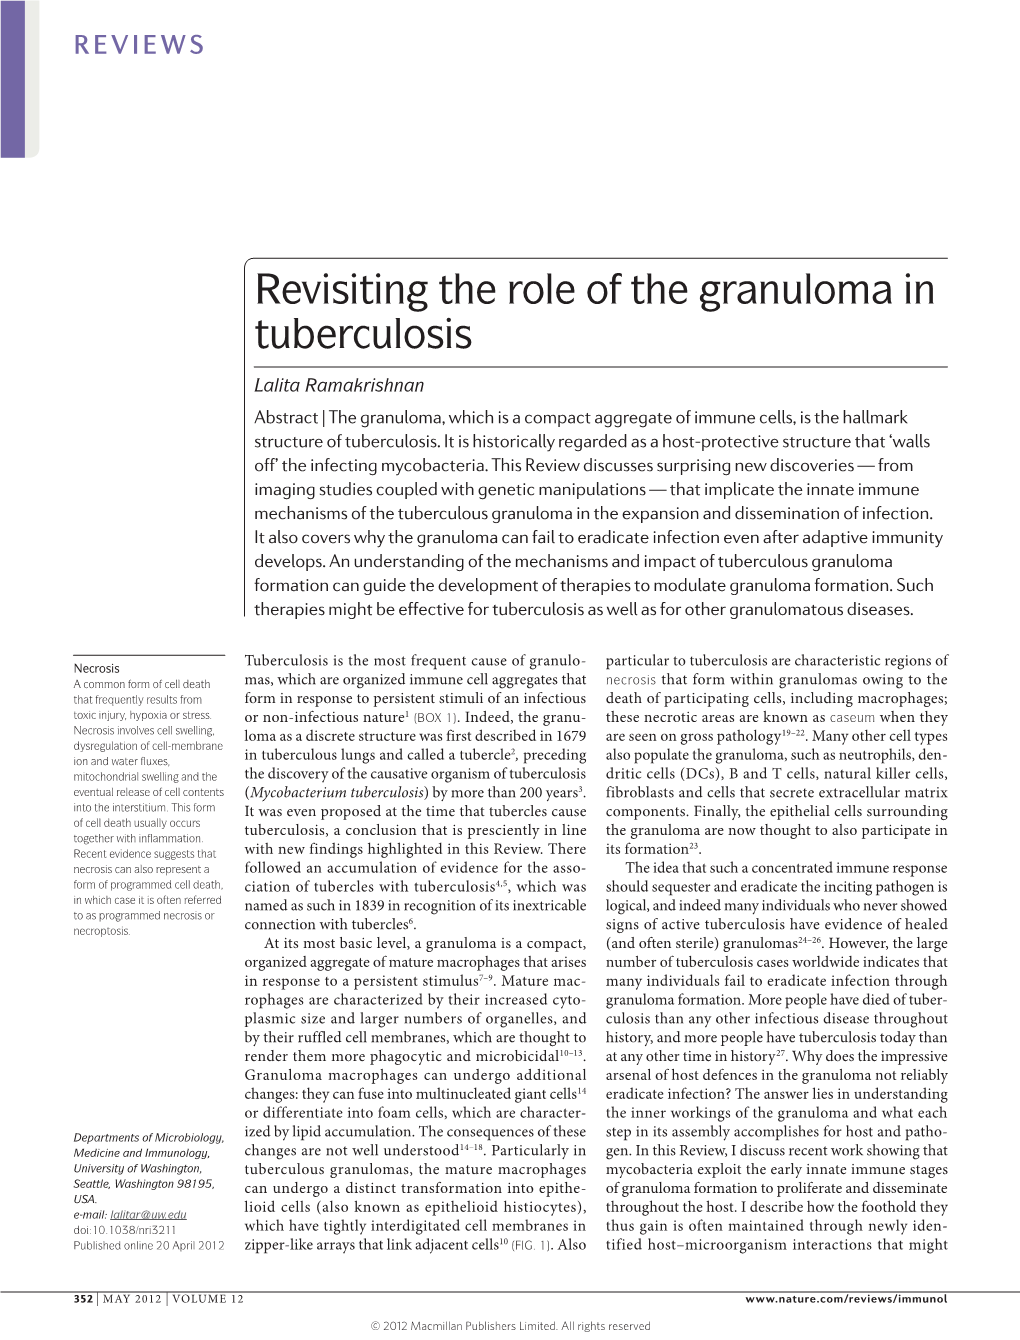 Revisiting the Role of the Granuloma in Tuberculosis